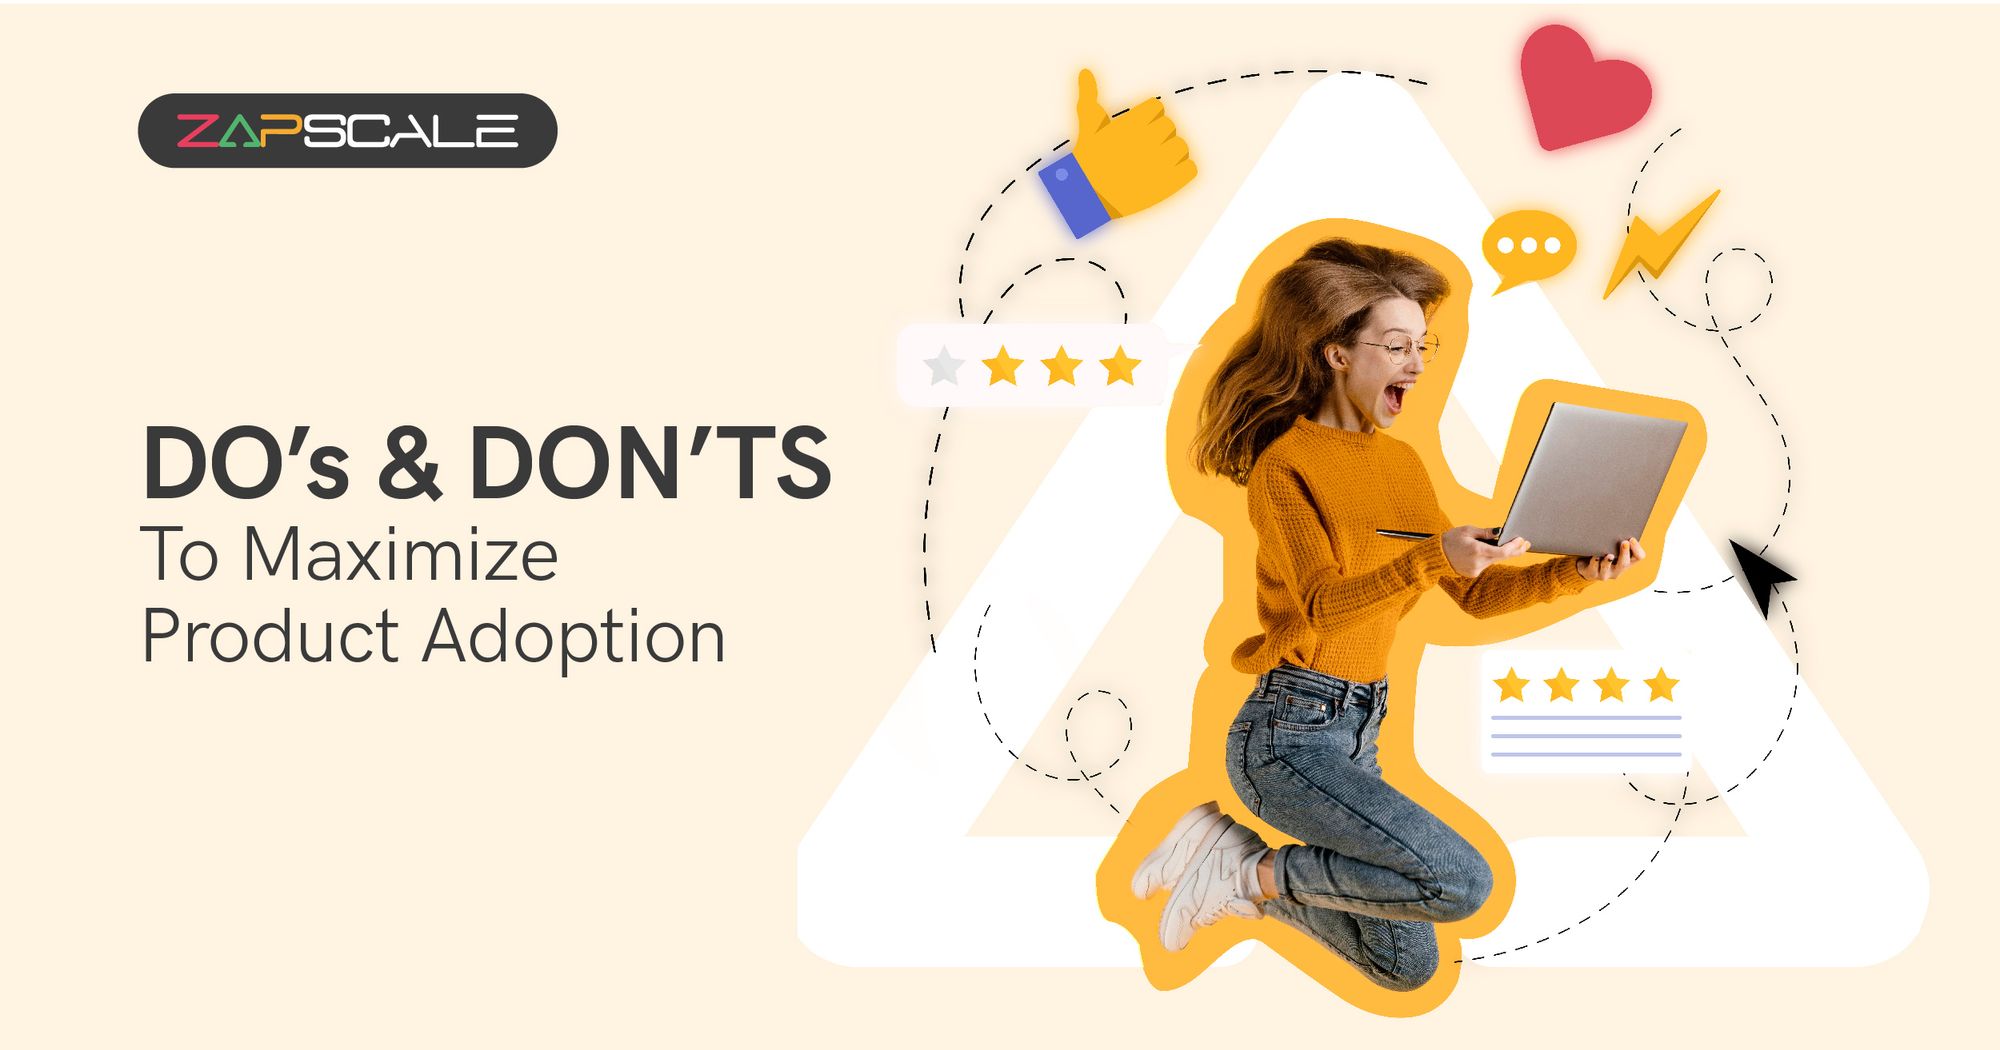 5 Do’s and Don’ts To Maximize Product Adoption